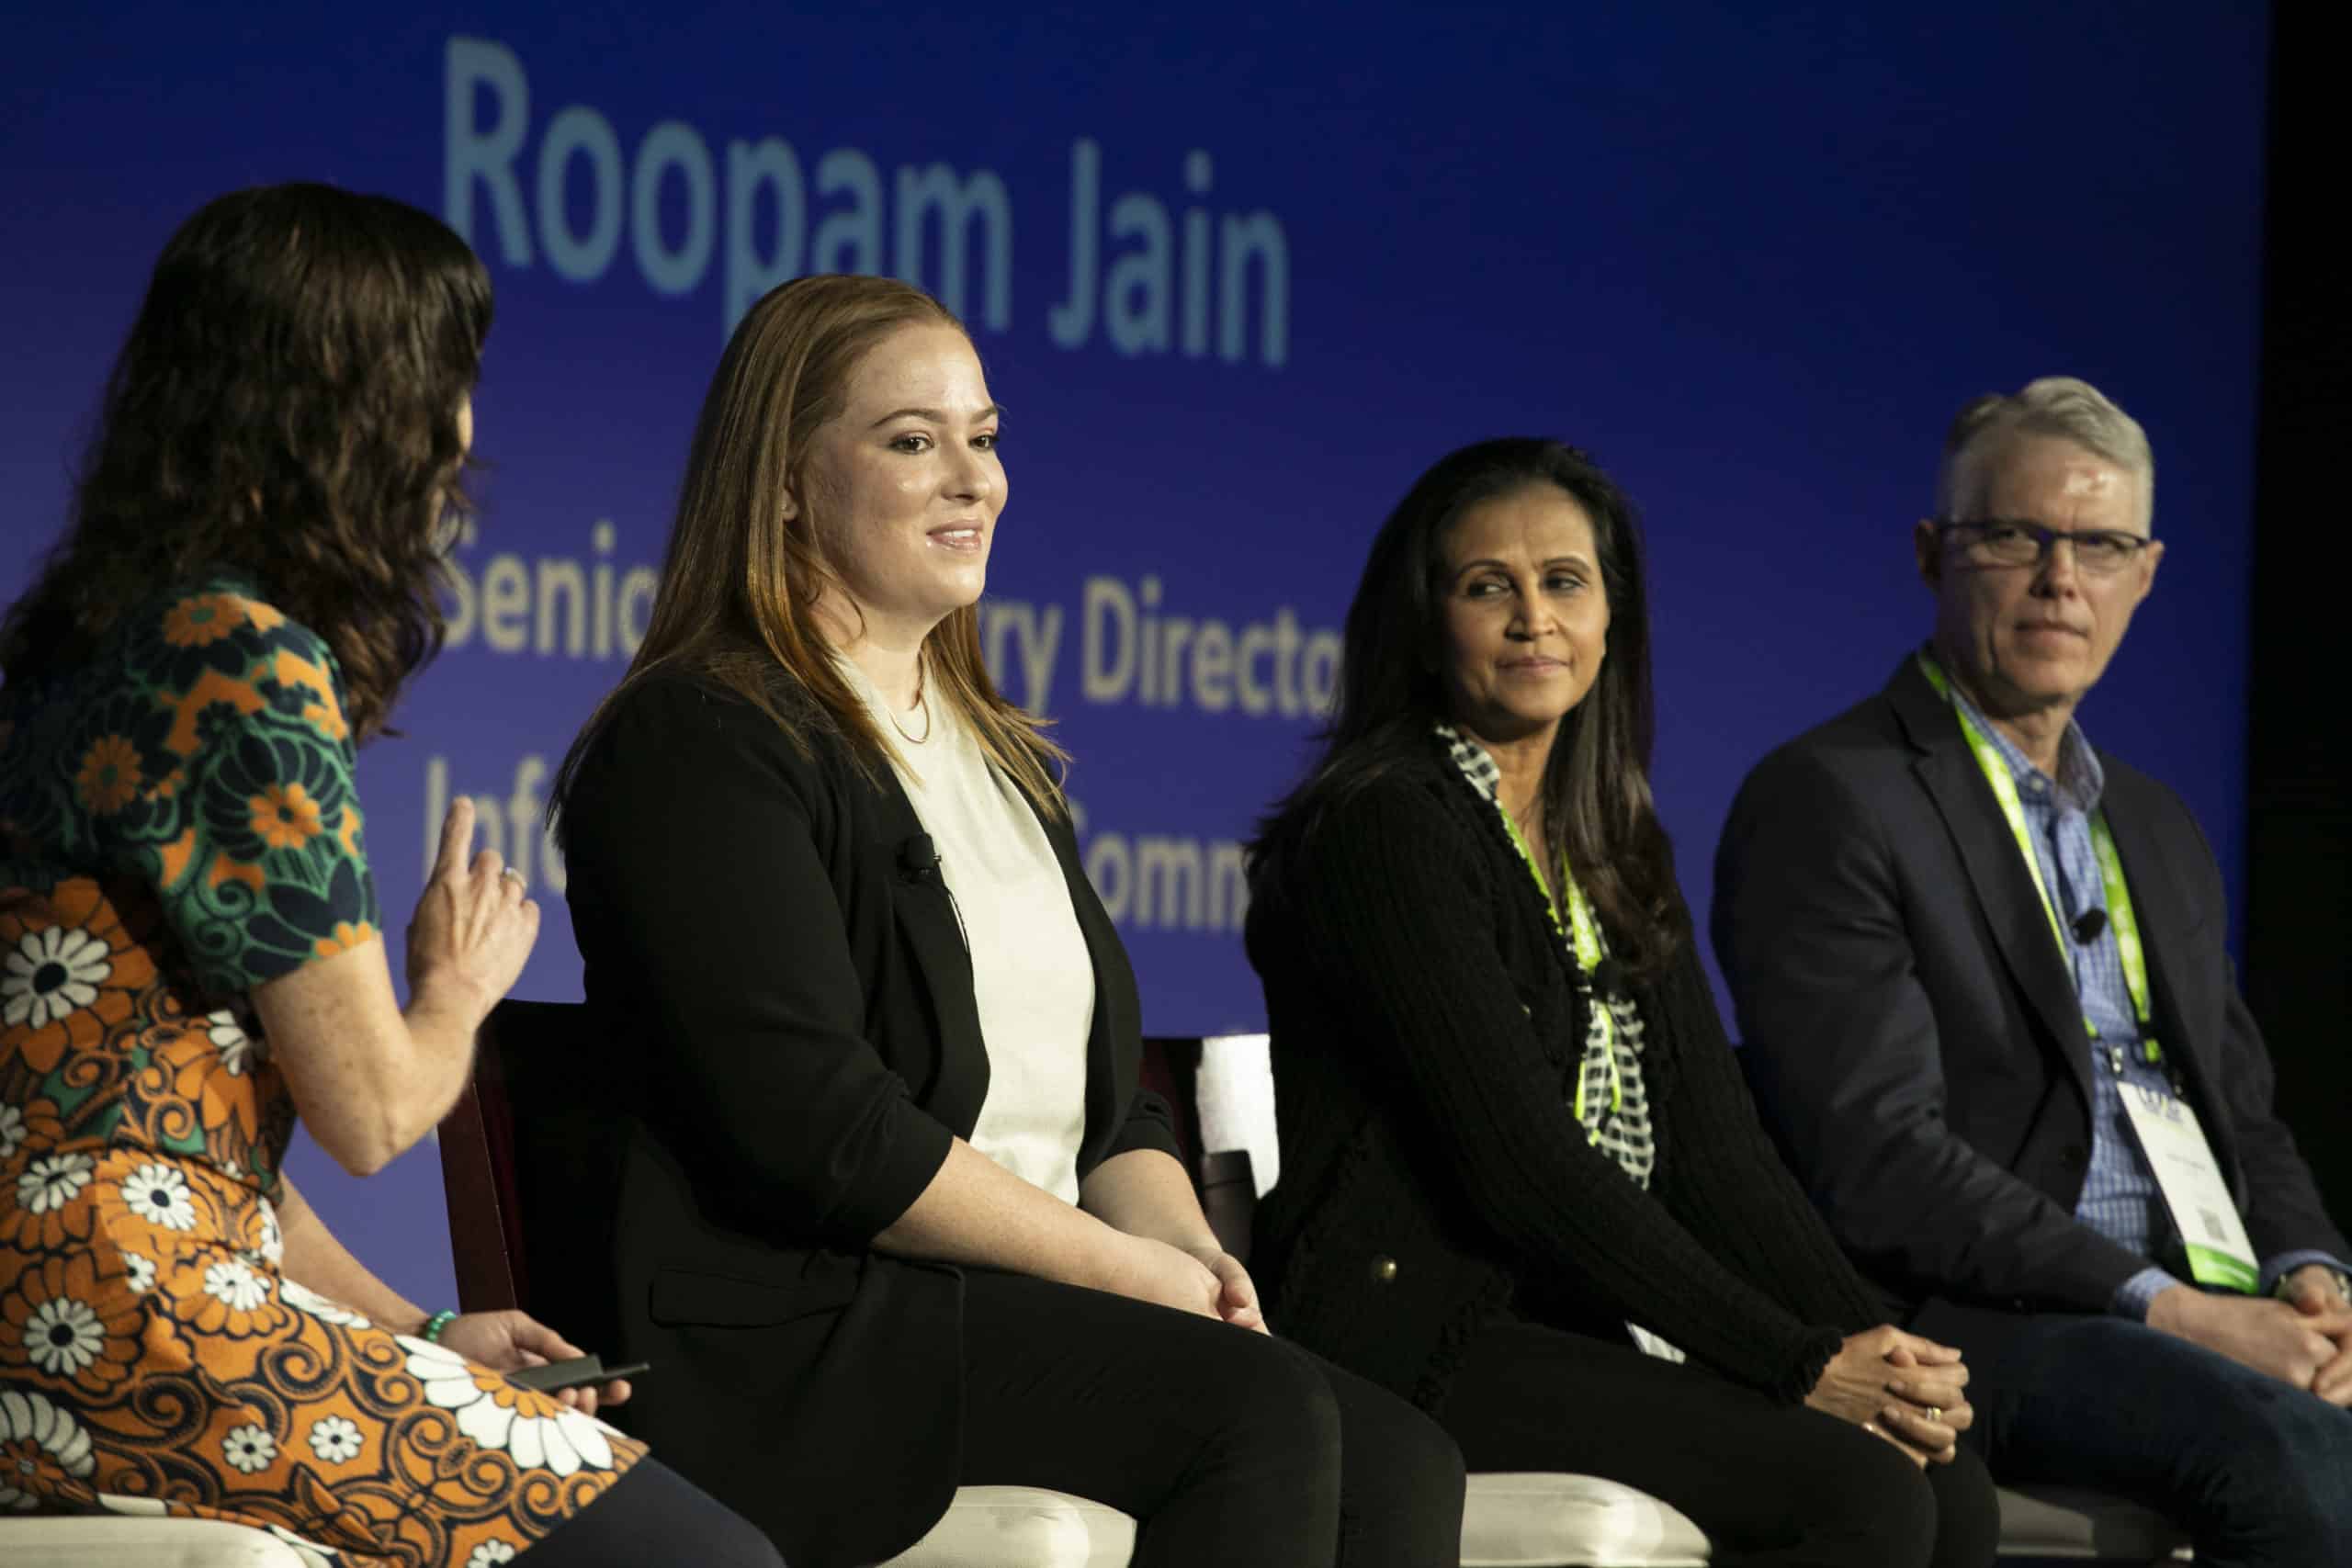 Human centric workplace panel with Roopam Jain